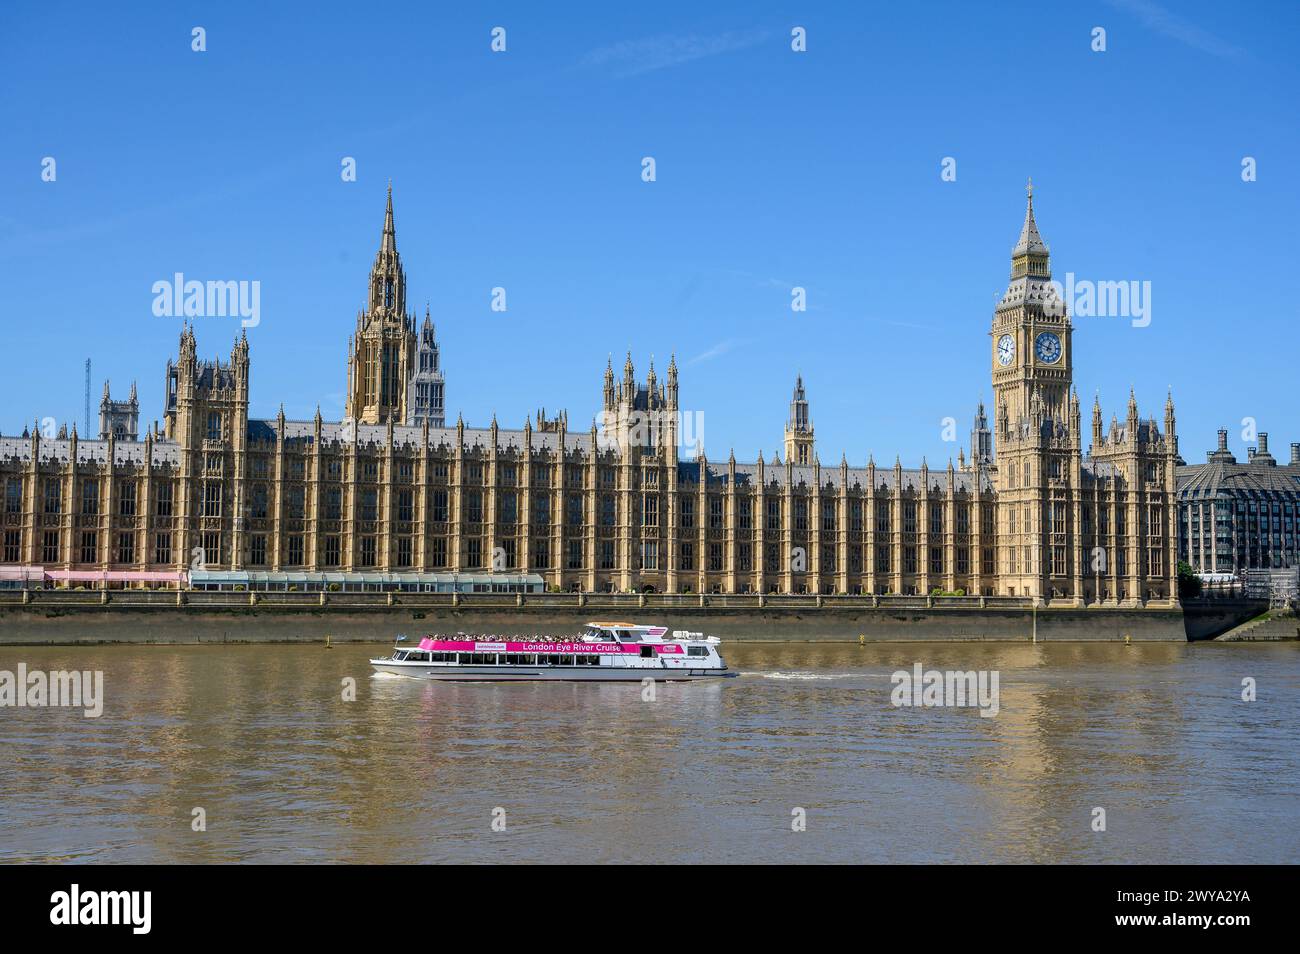 Tourist boat passing The Palace of Westminster, London, England. Stock Photo